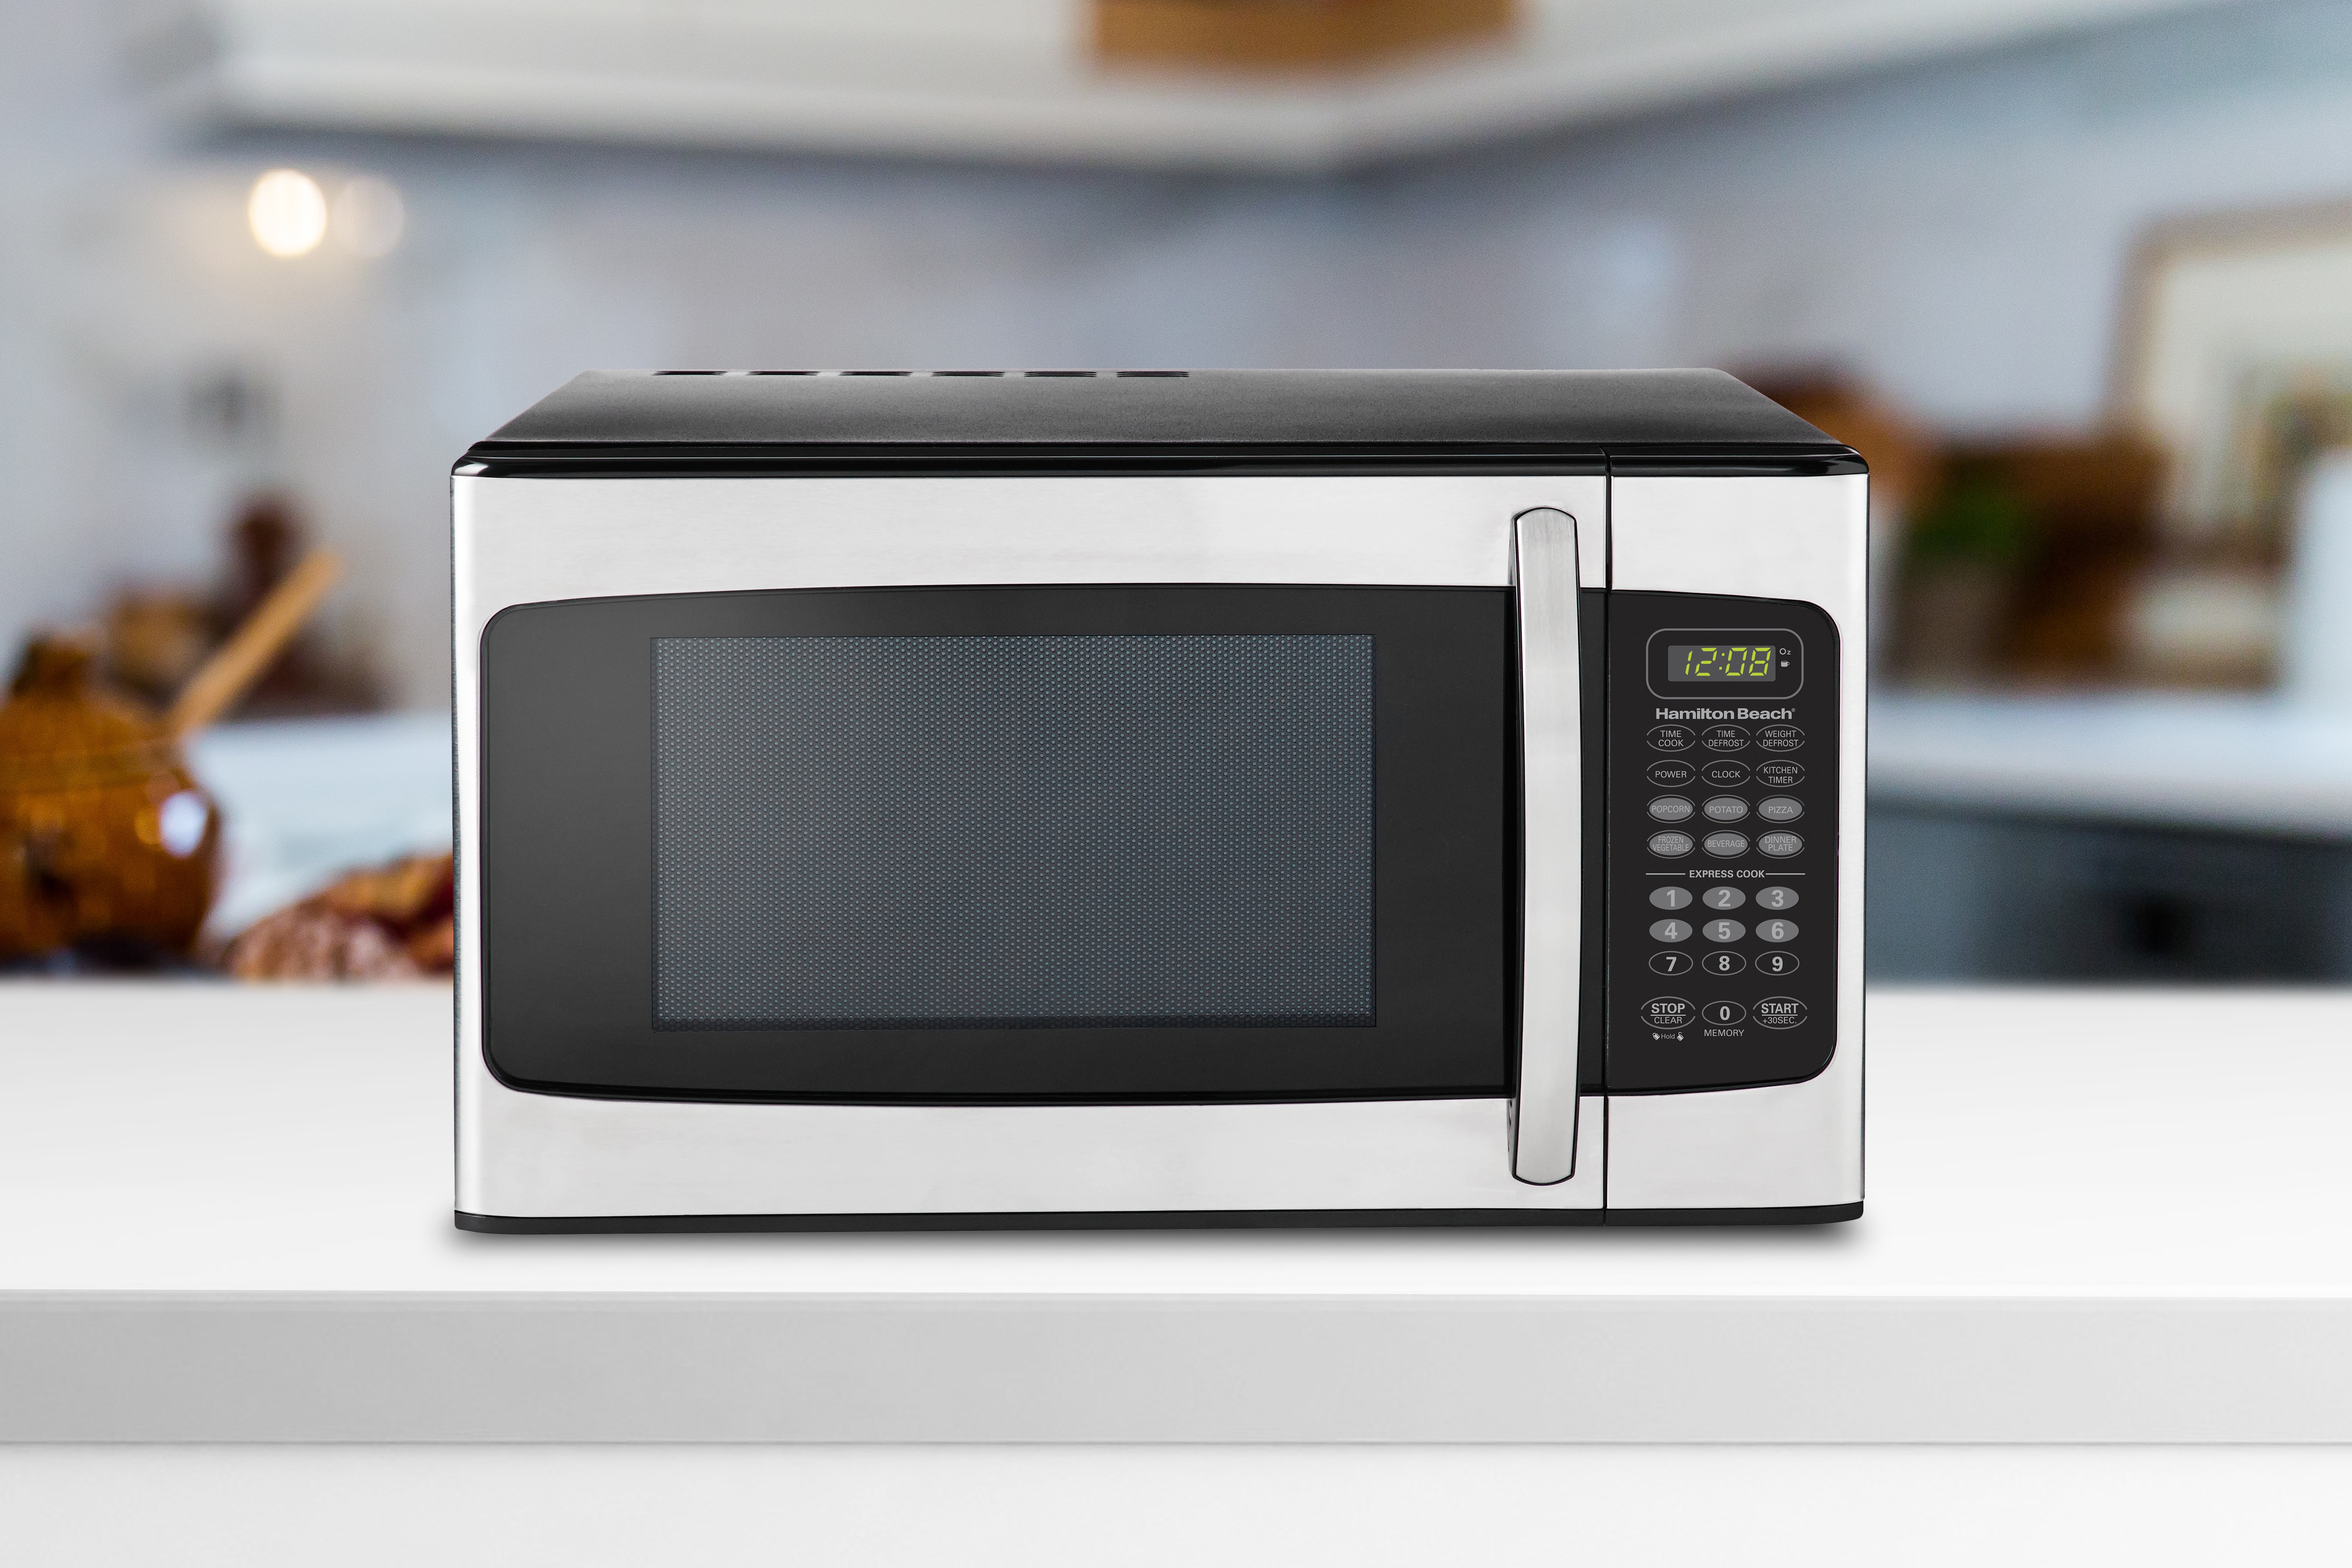 Hamilton Beach 1.1 Cu. ft. Stainless Steel Mid Size, 1000 W, Microwave Oven - image 4 of 5